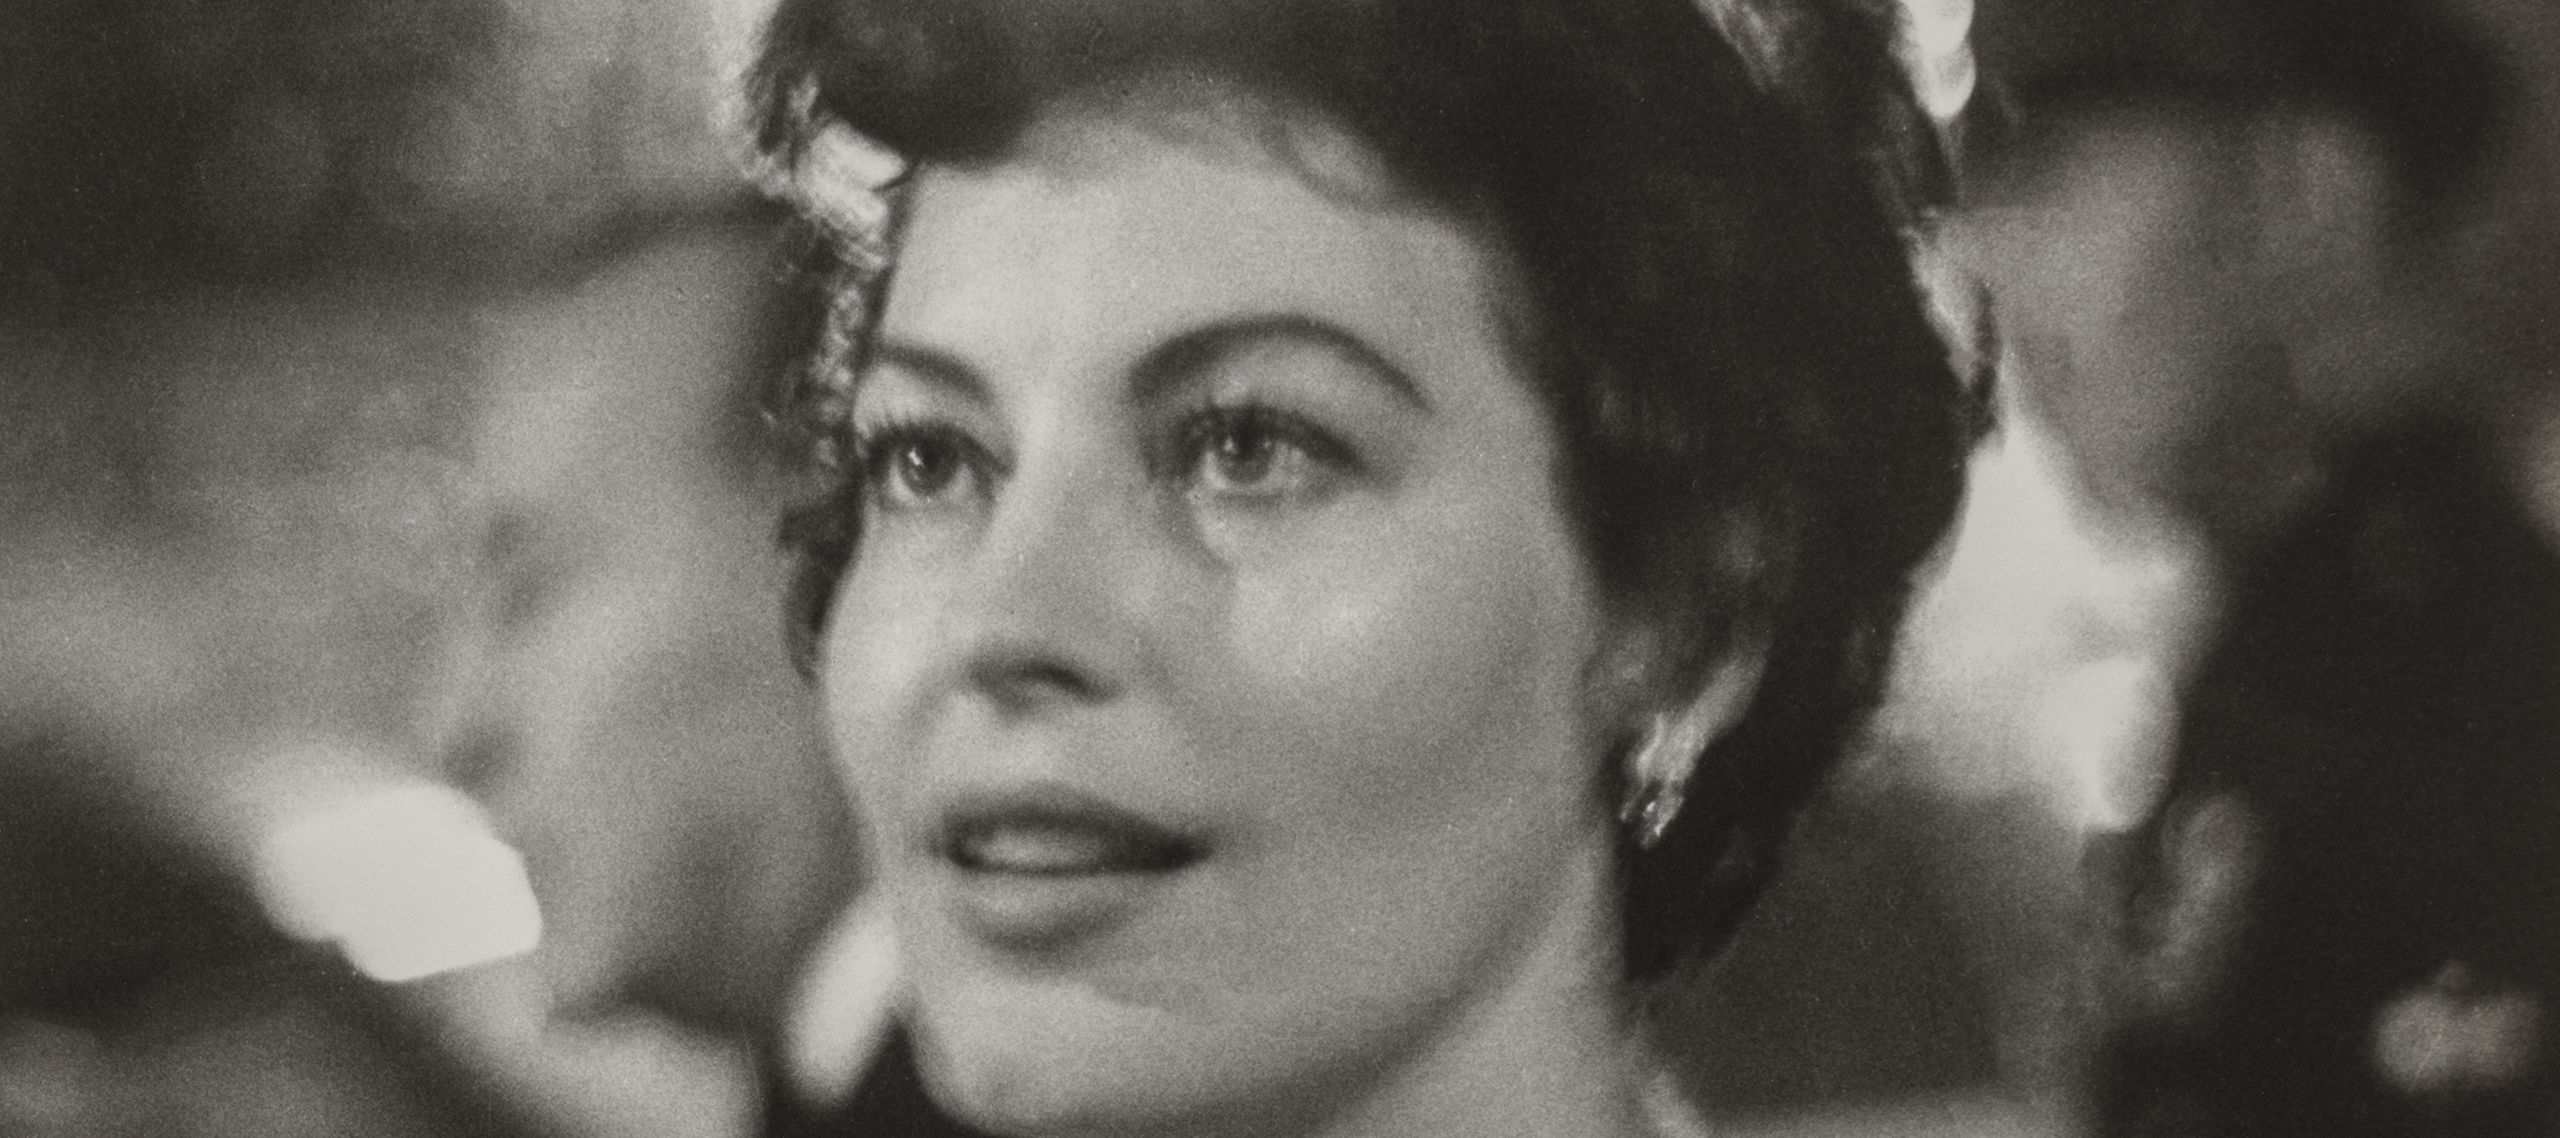 Ava Gardner, a woman with light skin tone and wavy, short brown hair, is shown from the shoulders up. She wears a jeweled necklace and is surrounded by lights and people at a party. She looks to the side of the camera at something out of frame with a fixed gaze and slight smile.